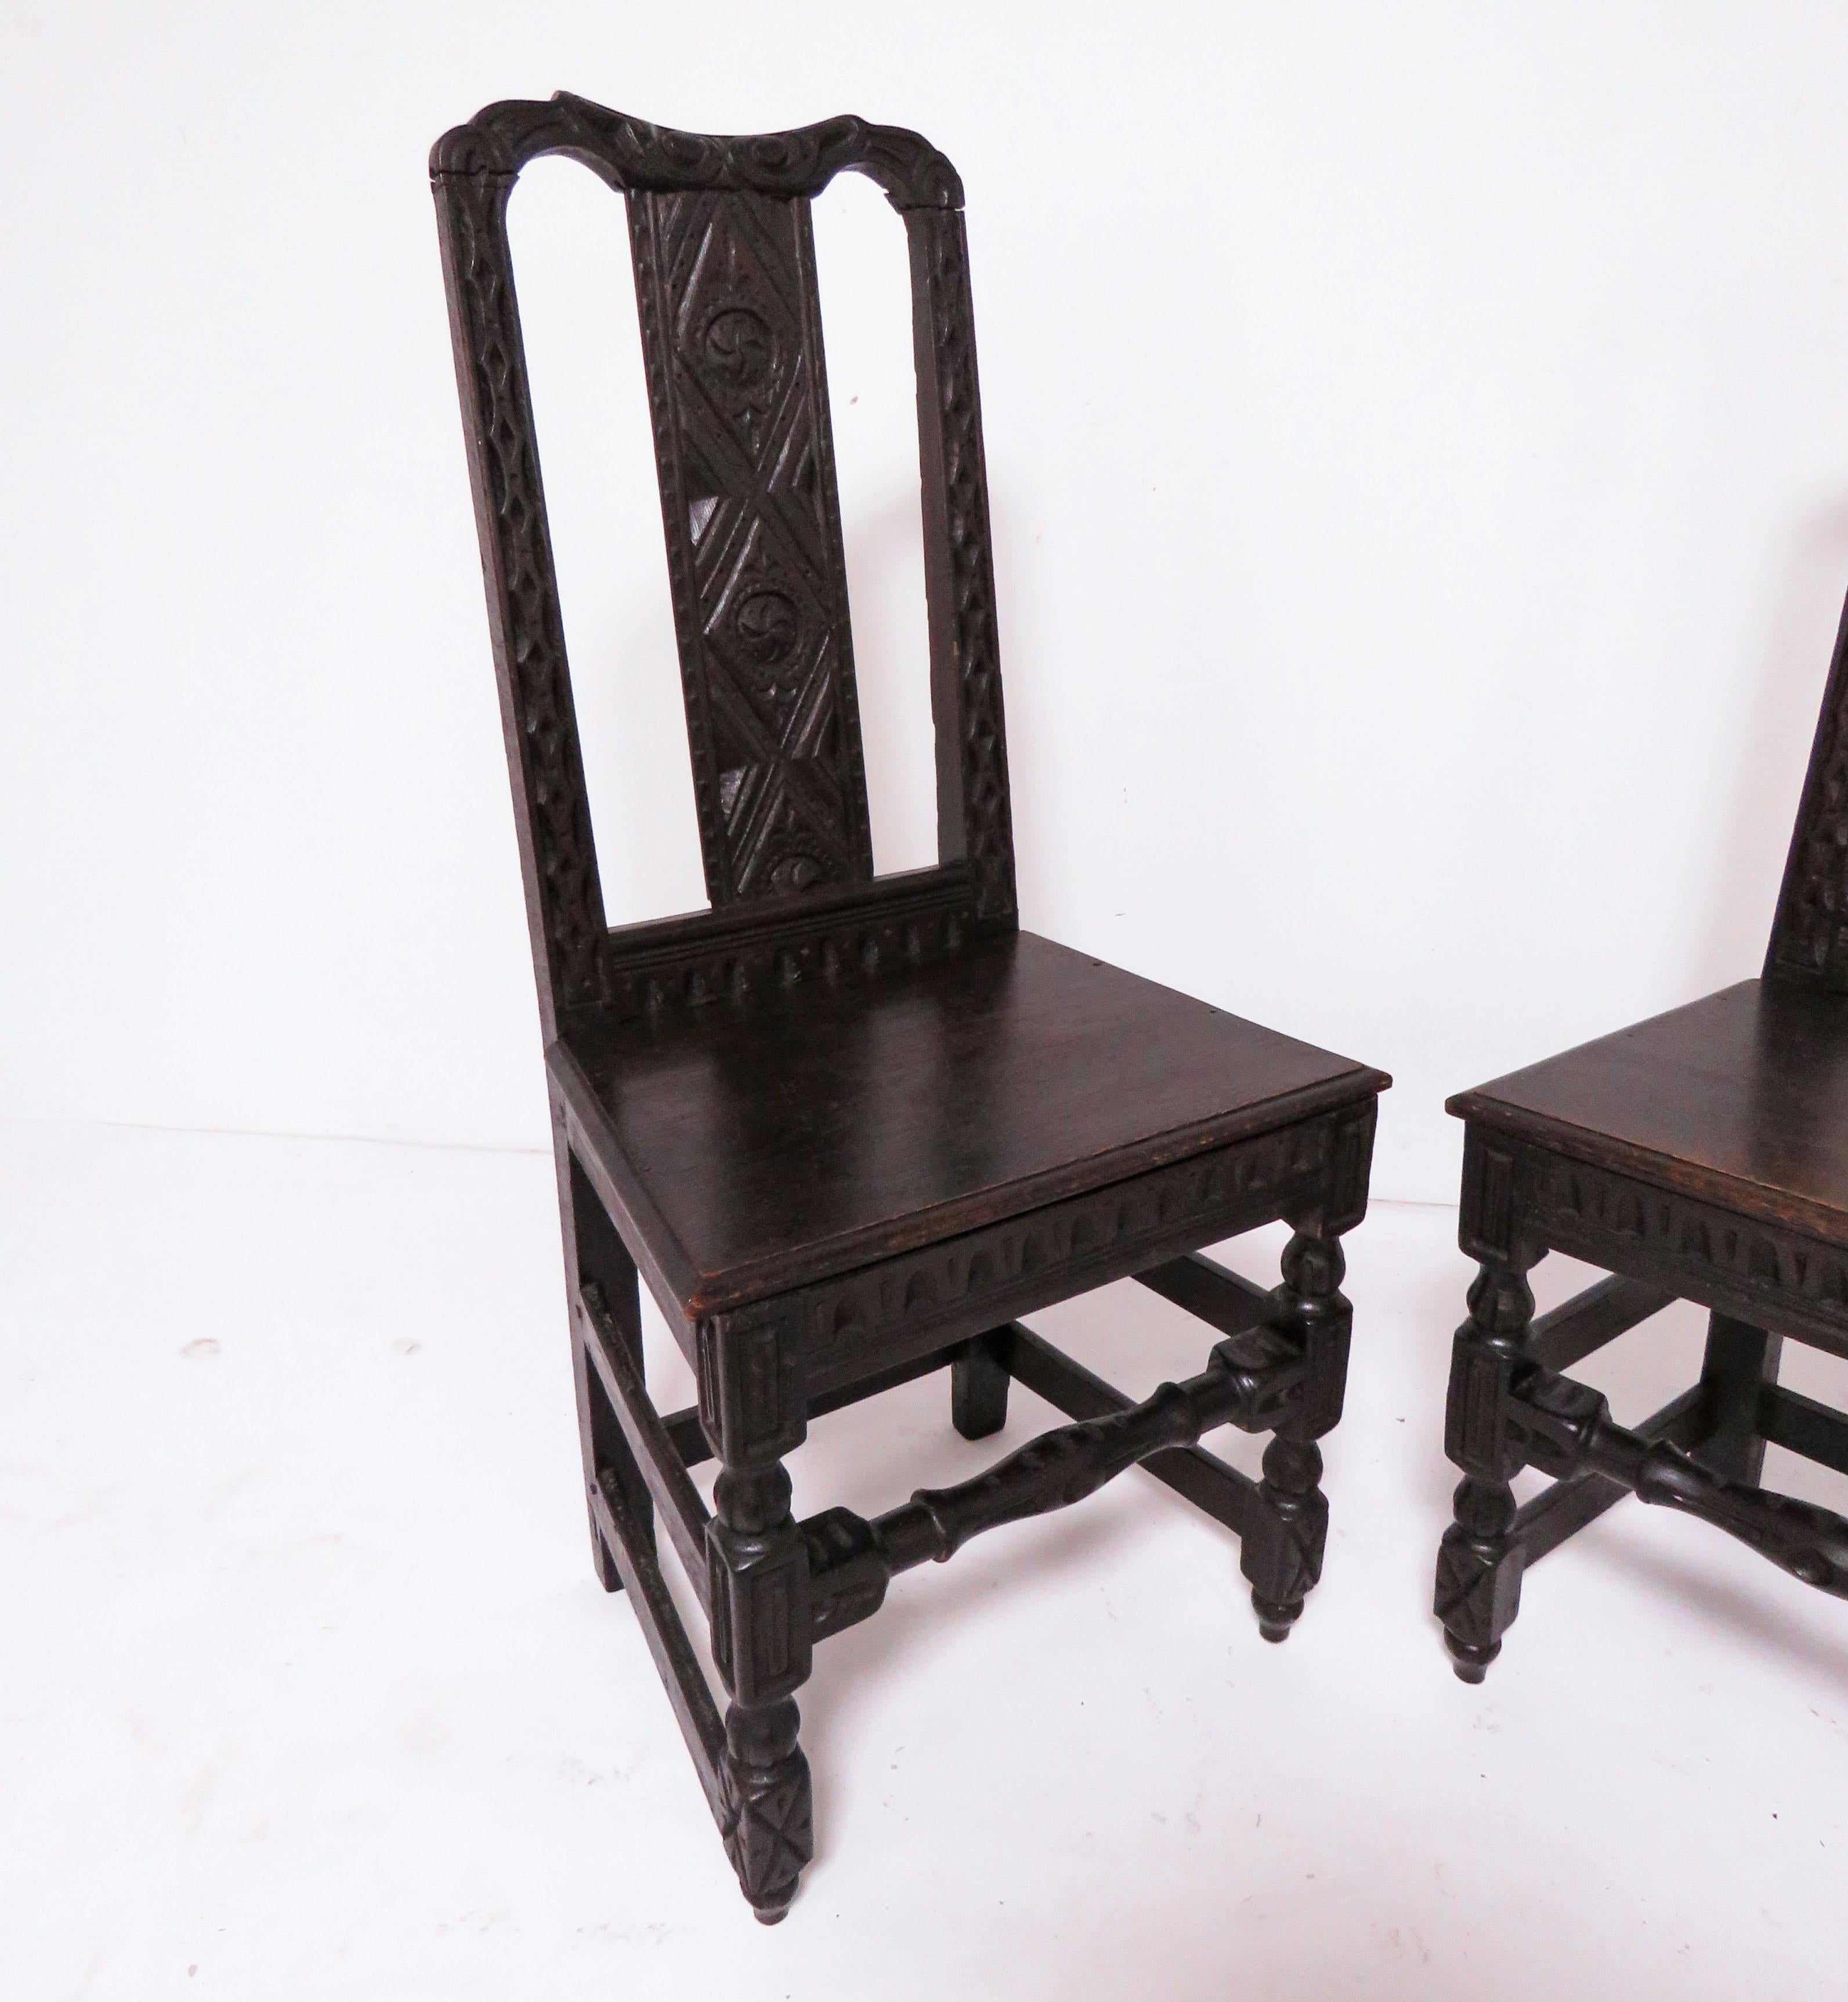 A pair of tastefully carved Flemish side chairs in ebonized walnut, dating to the second quarter of the 19th century.

Due to their handmade nature, there are very slight differences in their overall measurements. One measures 18.5